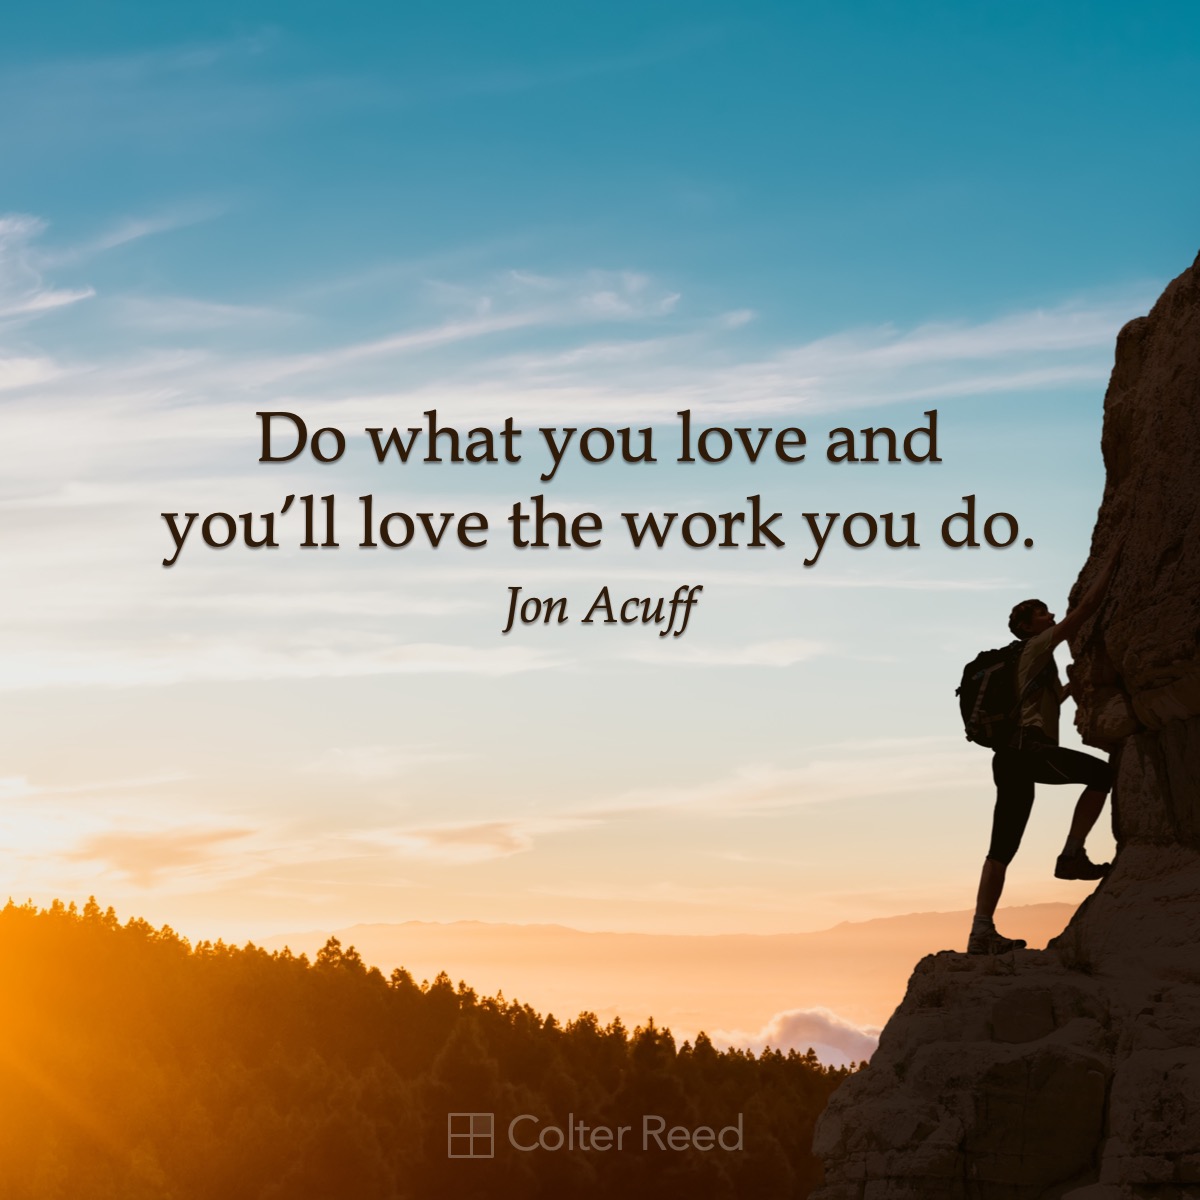 Do what you love and you’ll love the work you do. —Jon Acuff